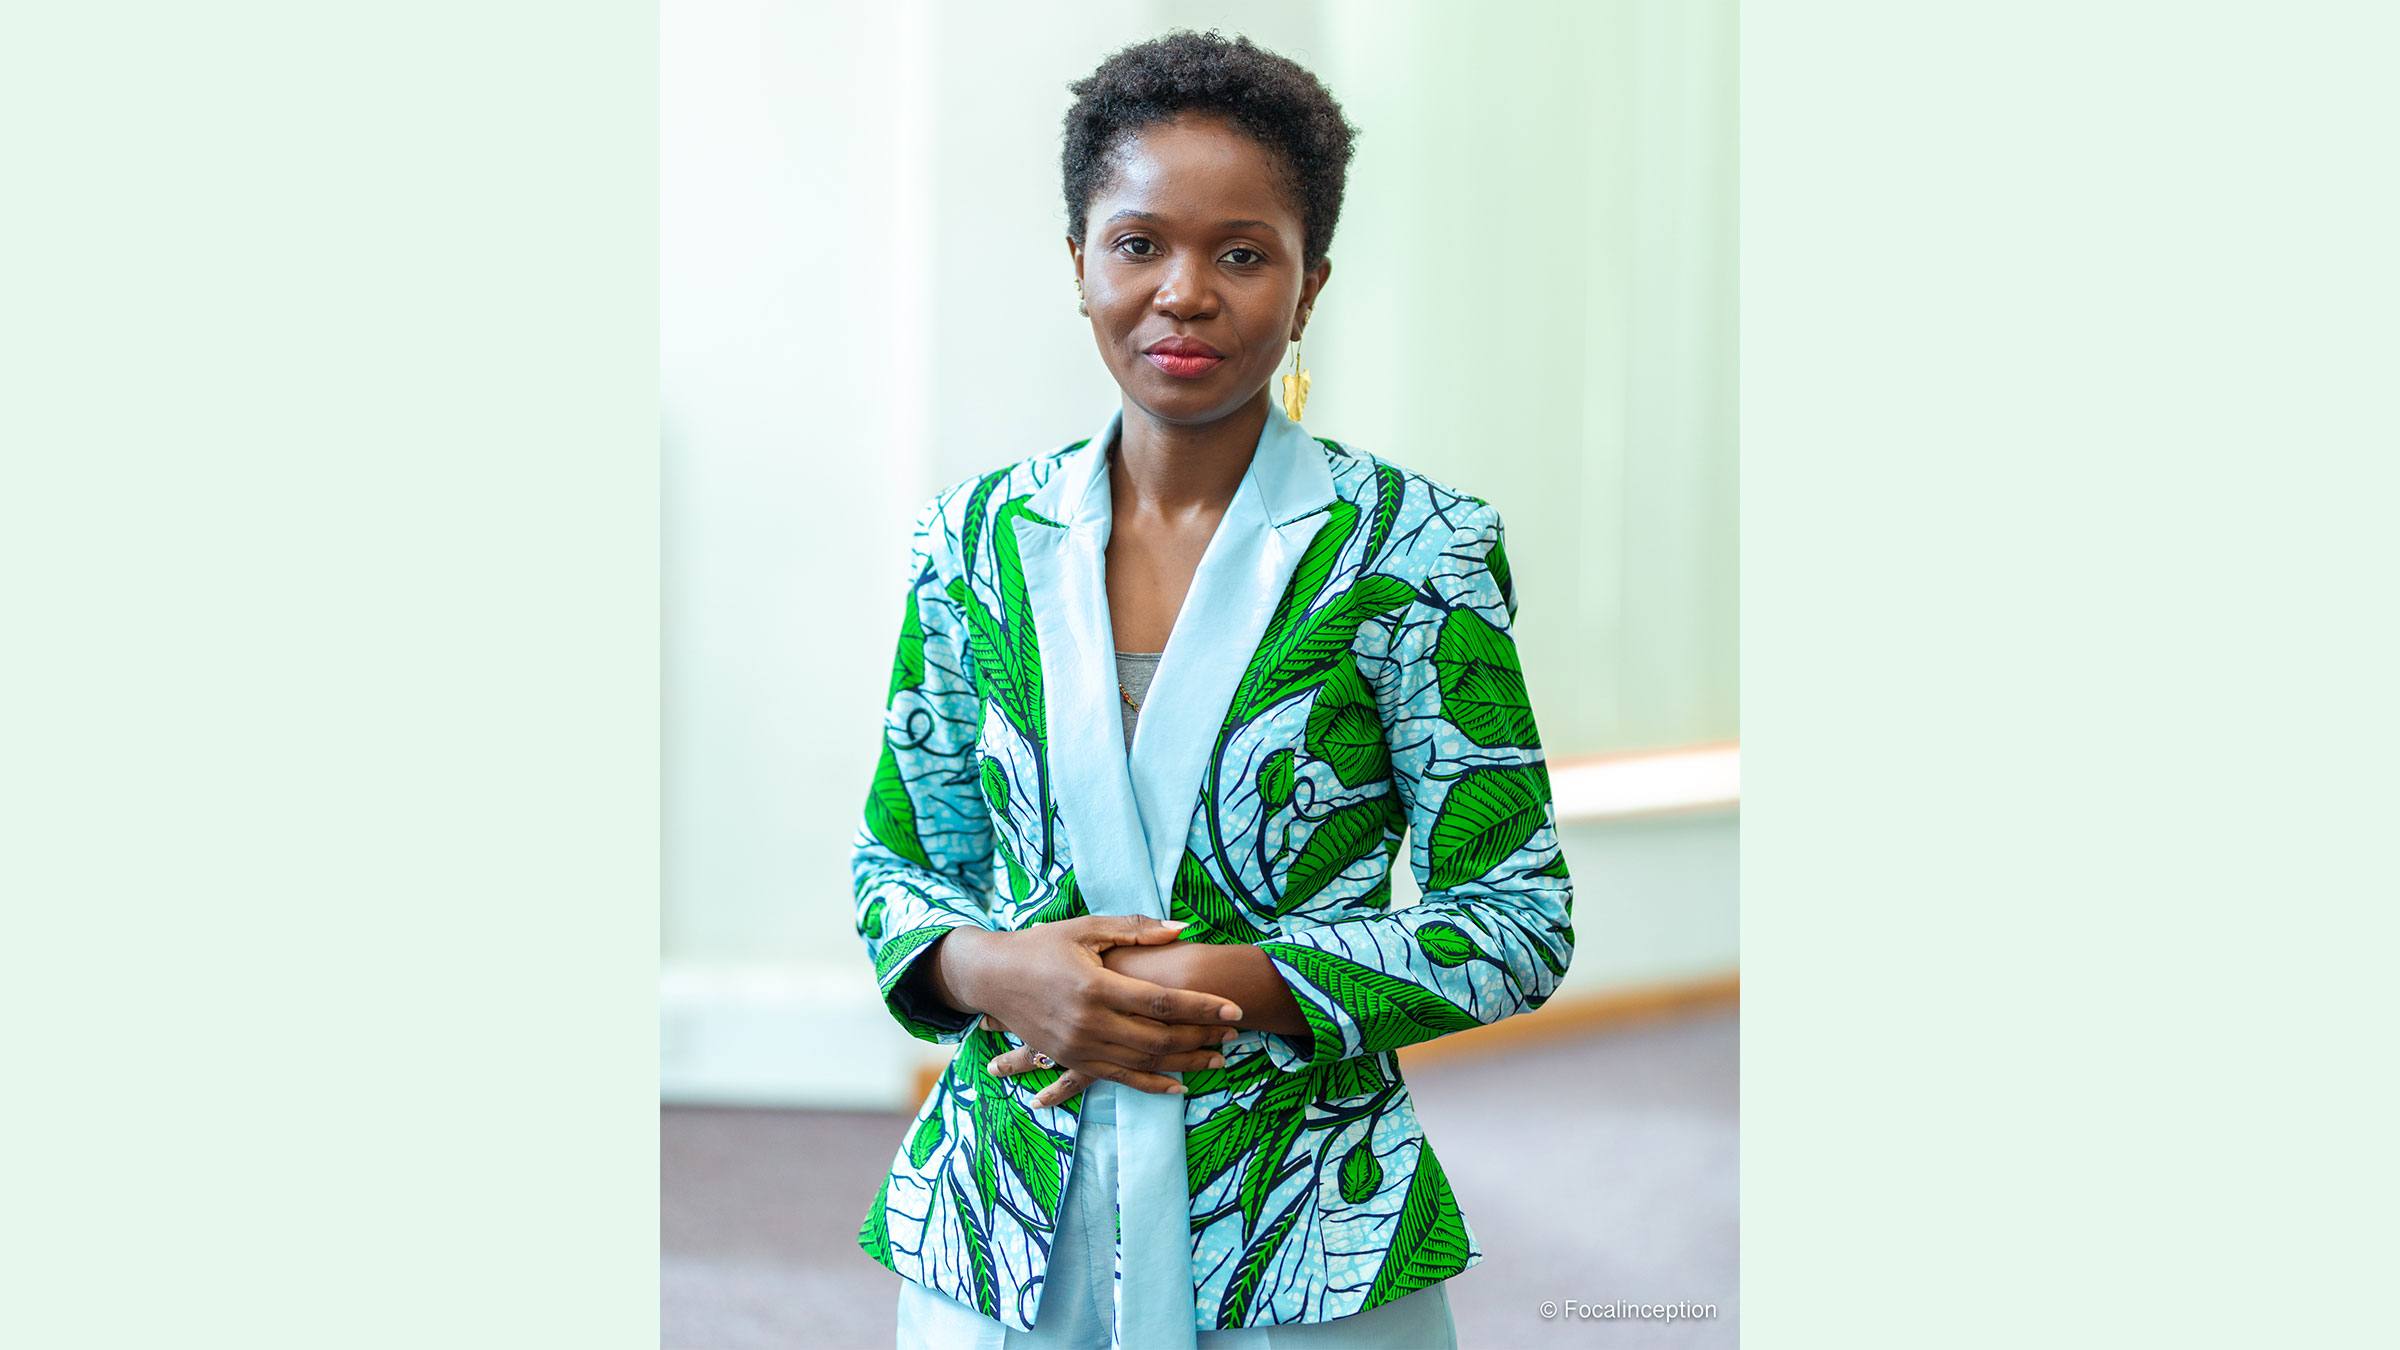 “I want to make the world a better place for my daughter”: in conversation with Fatoumata Doro, MD, Ghana at Vlisco